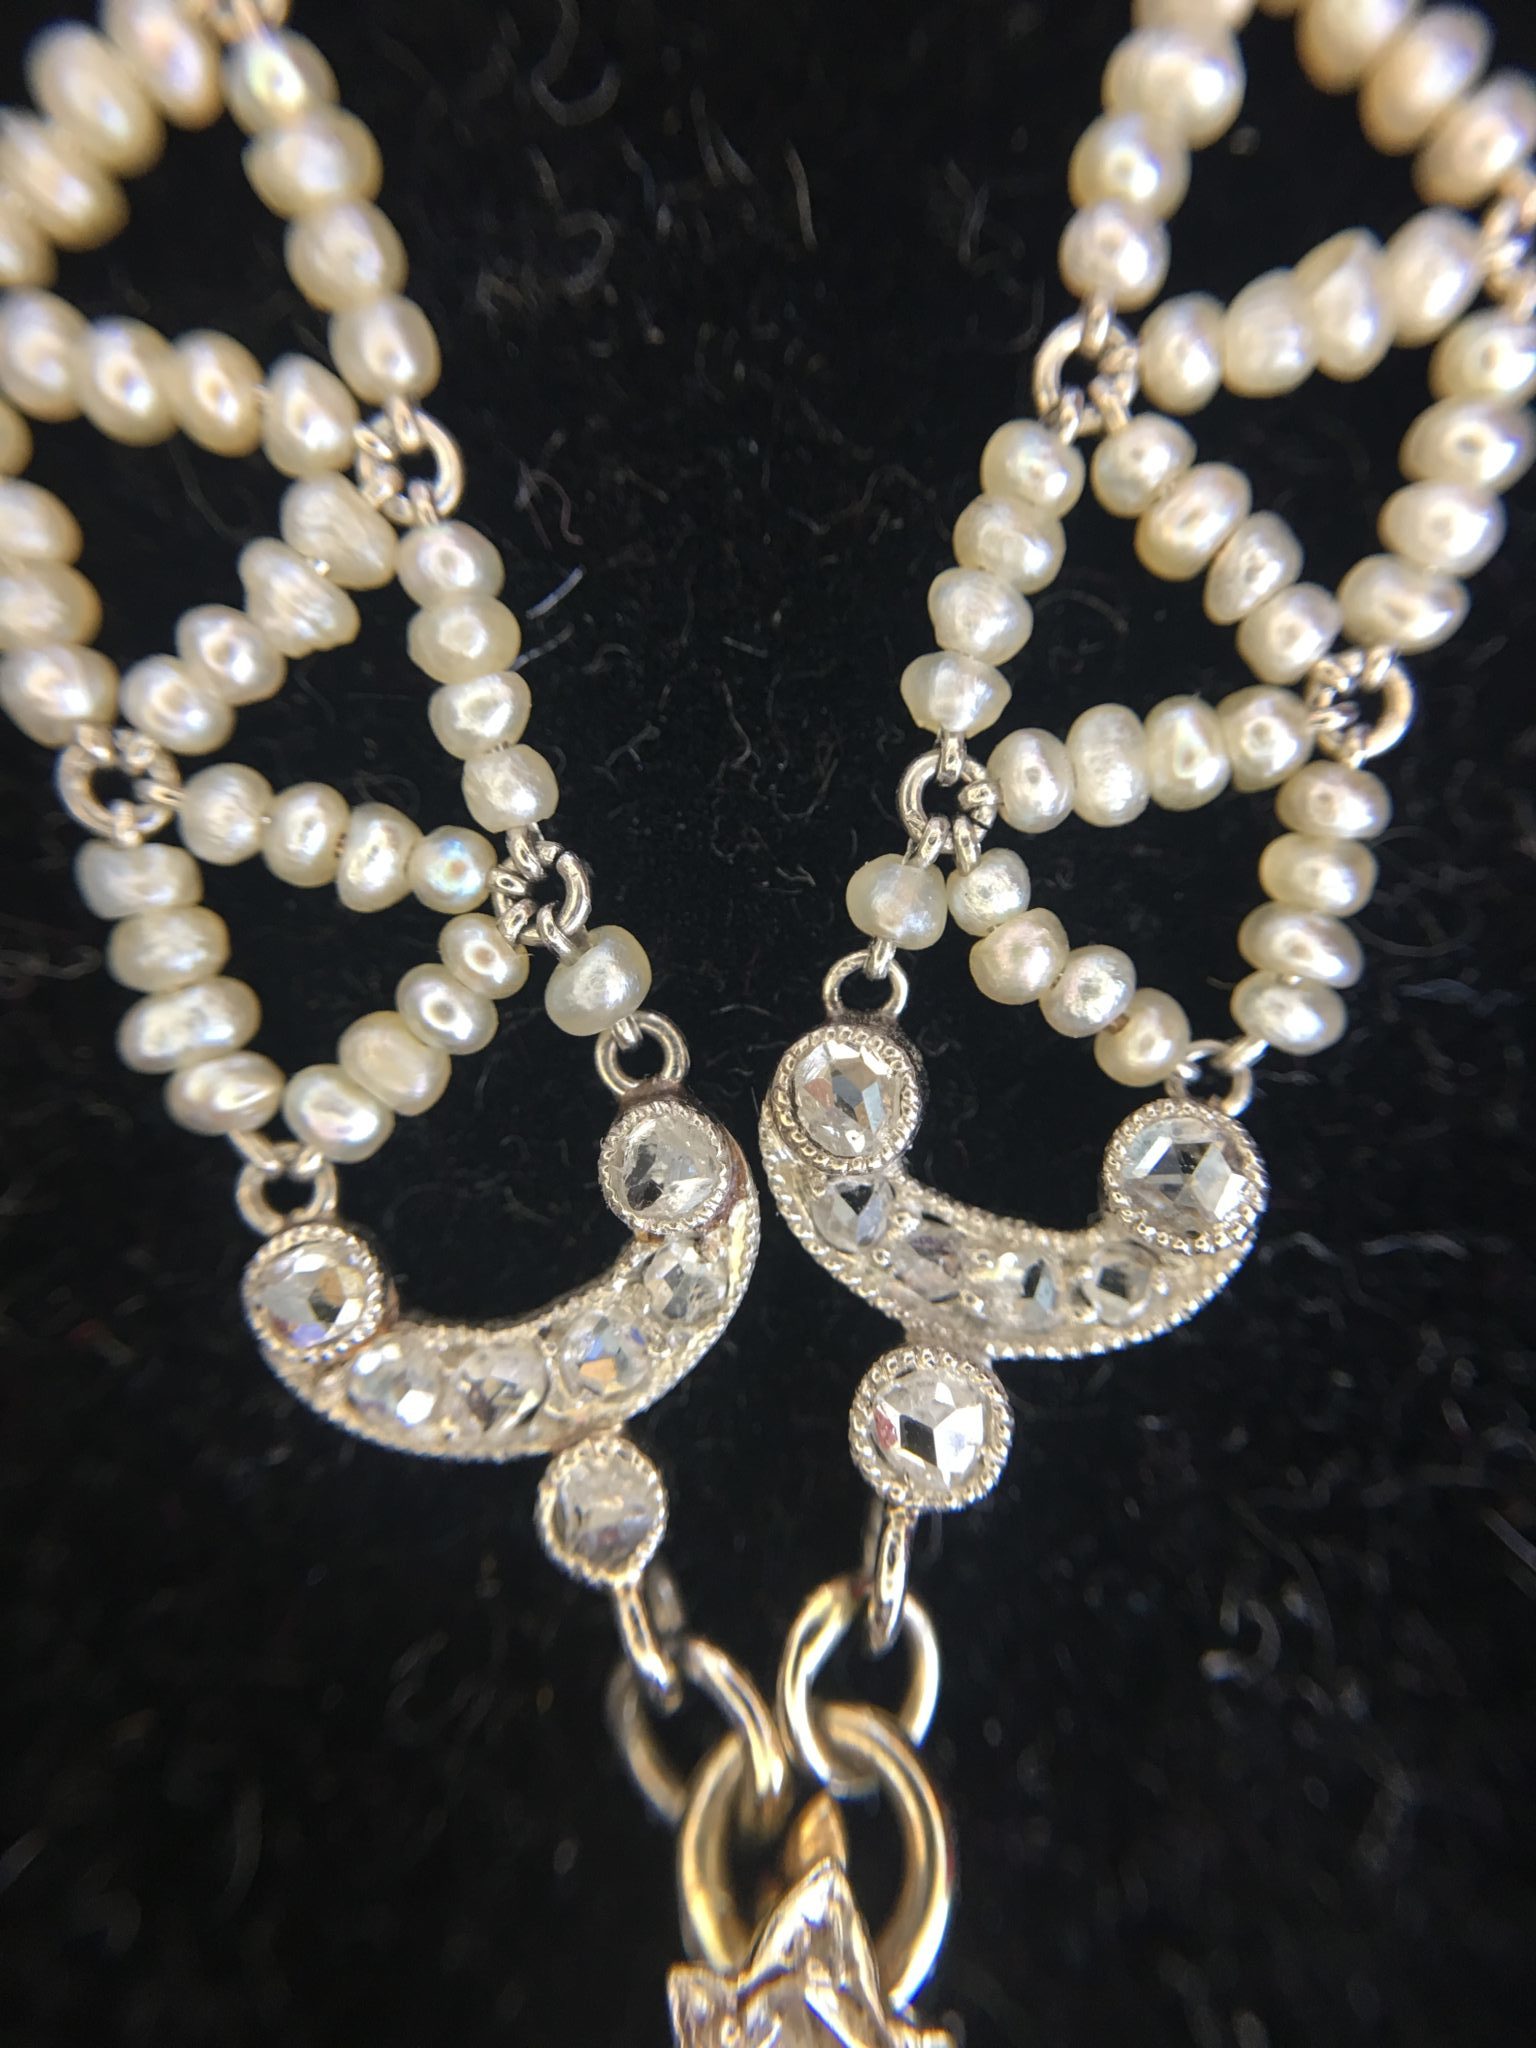 Outstanding Art Deco Seed Pearl Necklace with Baroque Pearl Drop (Vintage)